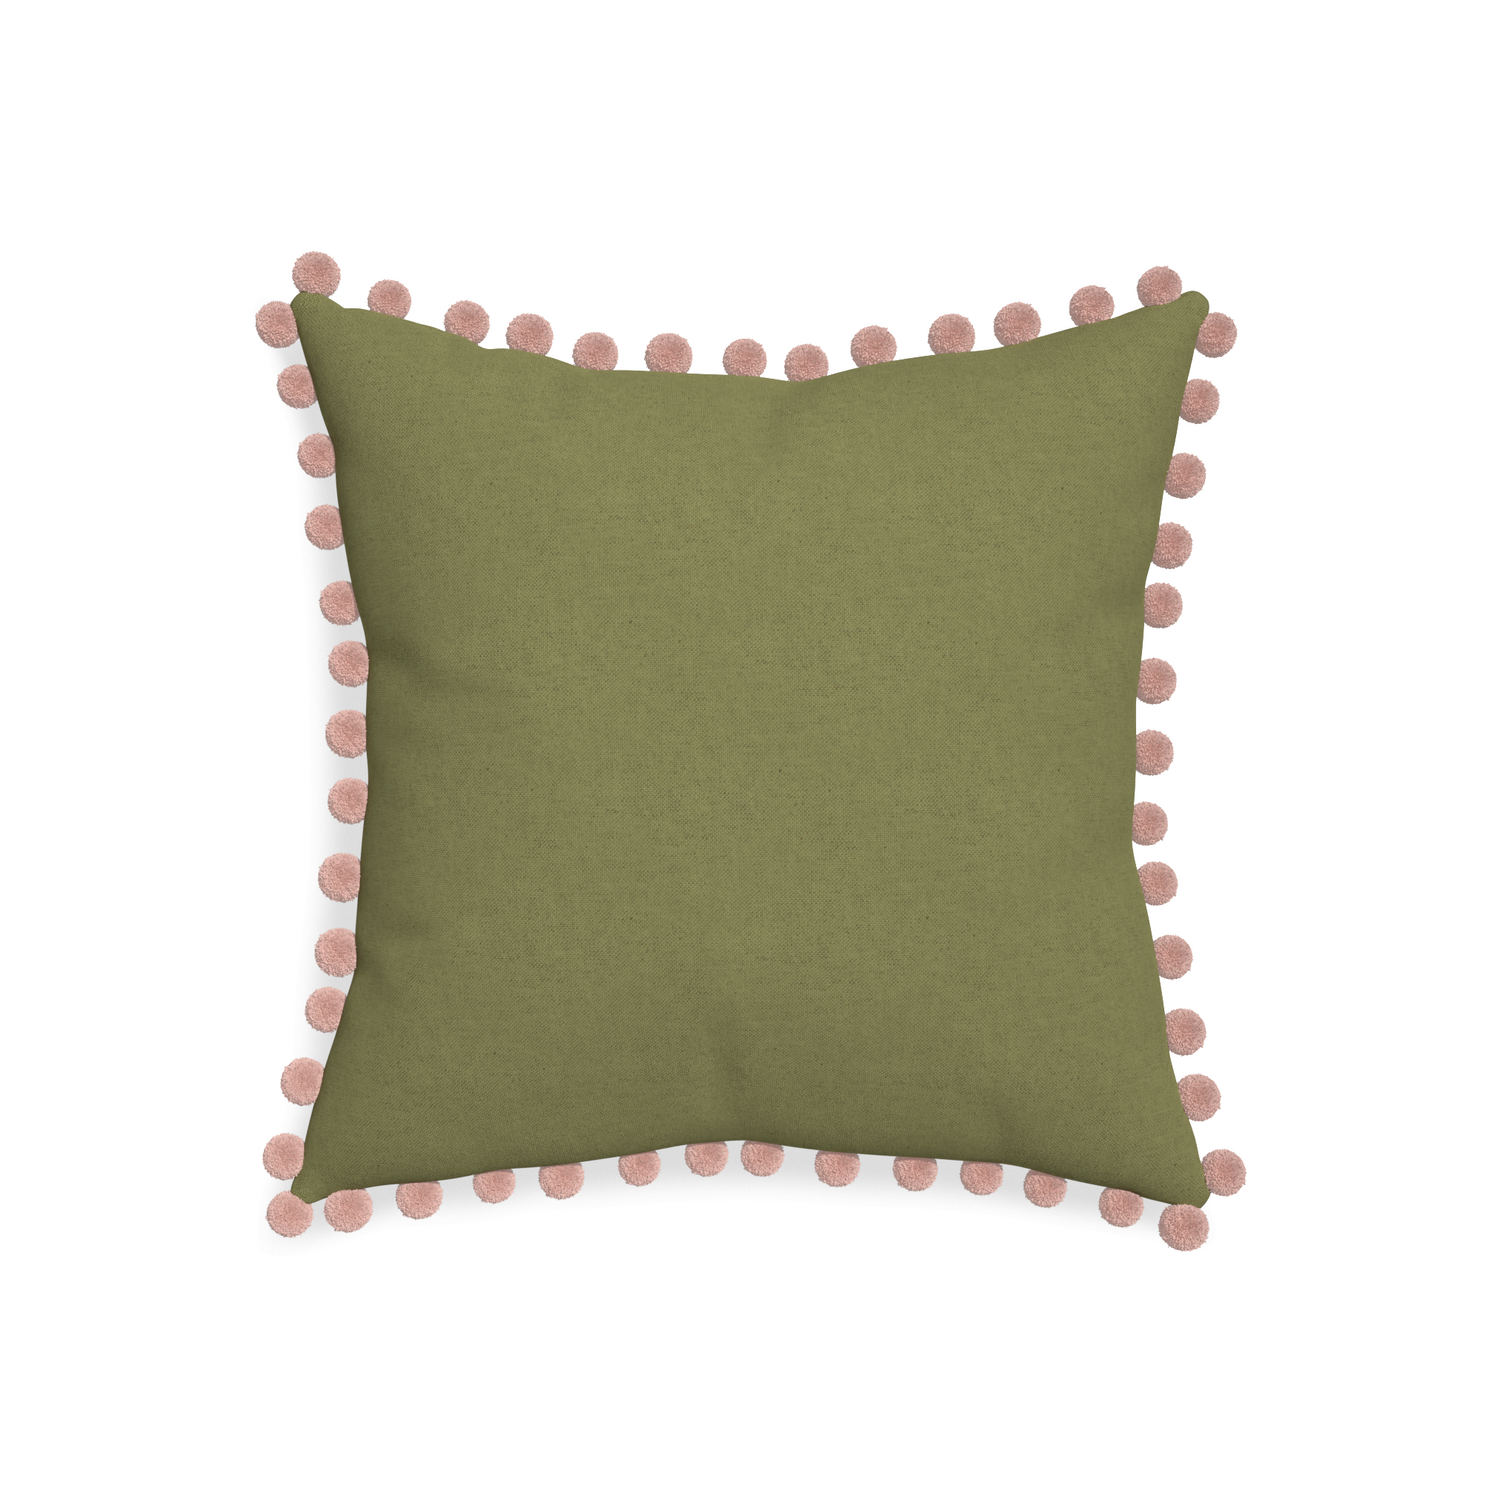 20-square moss custom moss greenpillow with rose pom pom on white background